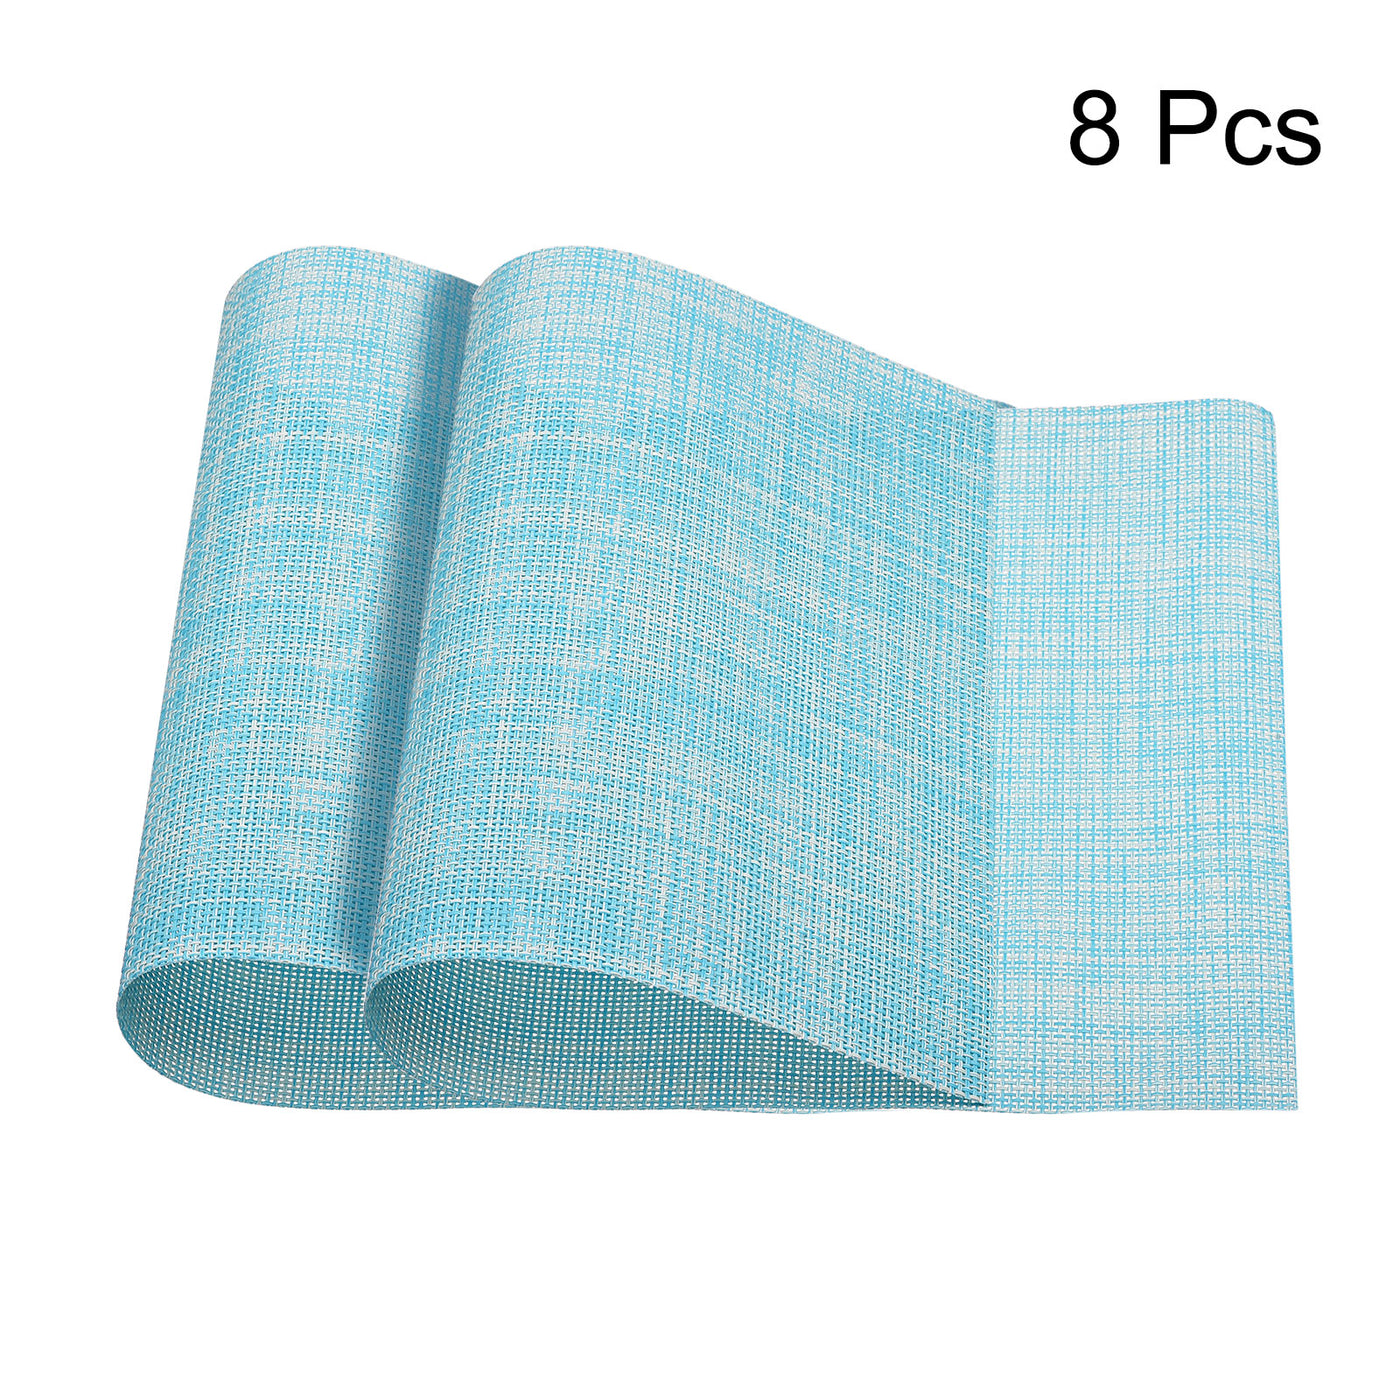 uxcell Uxcell Place Mats, 450x300mm Table Mats Set of 8 PVC Washable Woven Placemat Blue